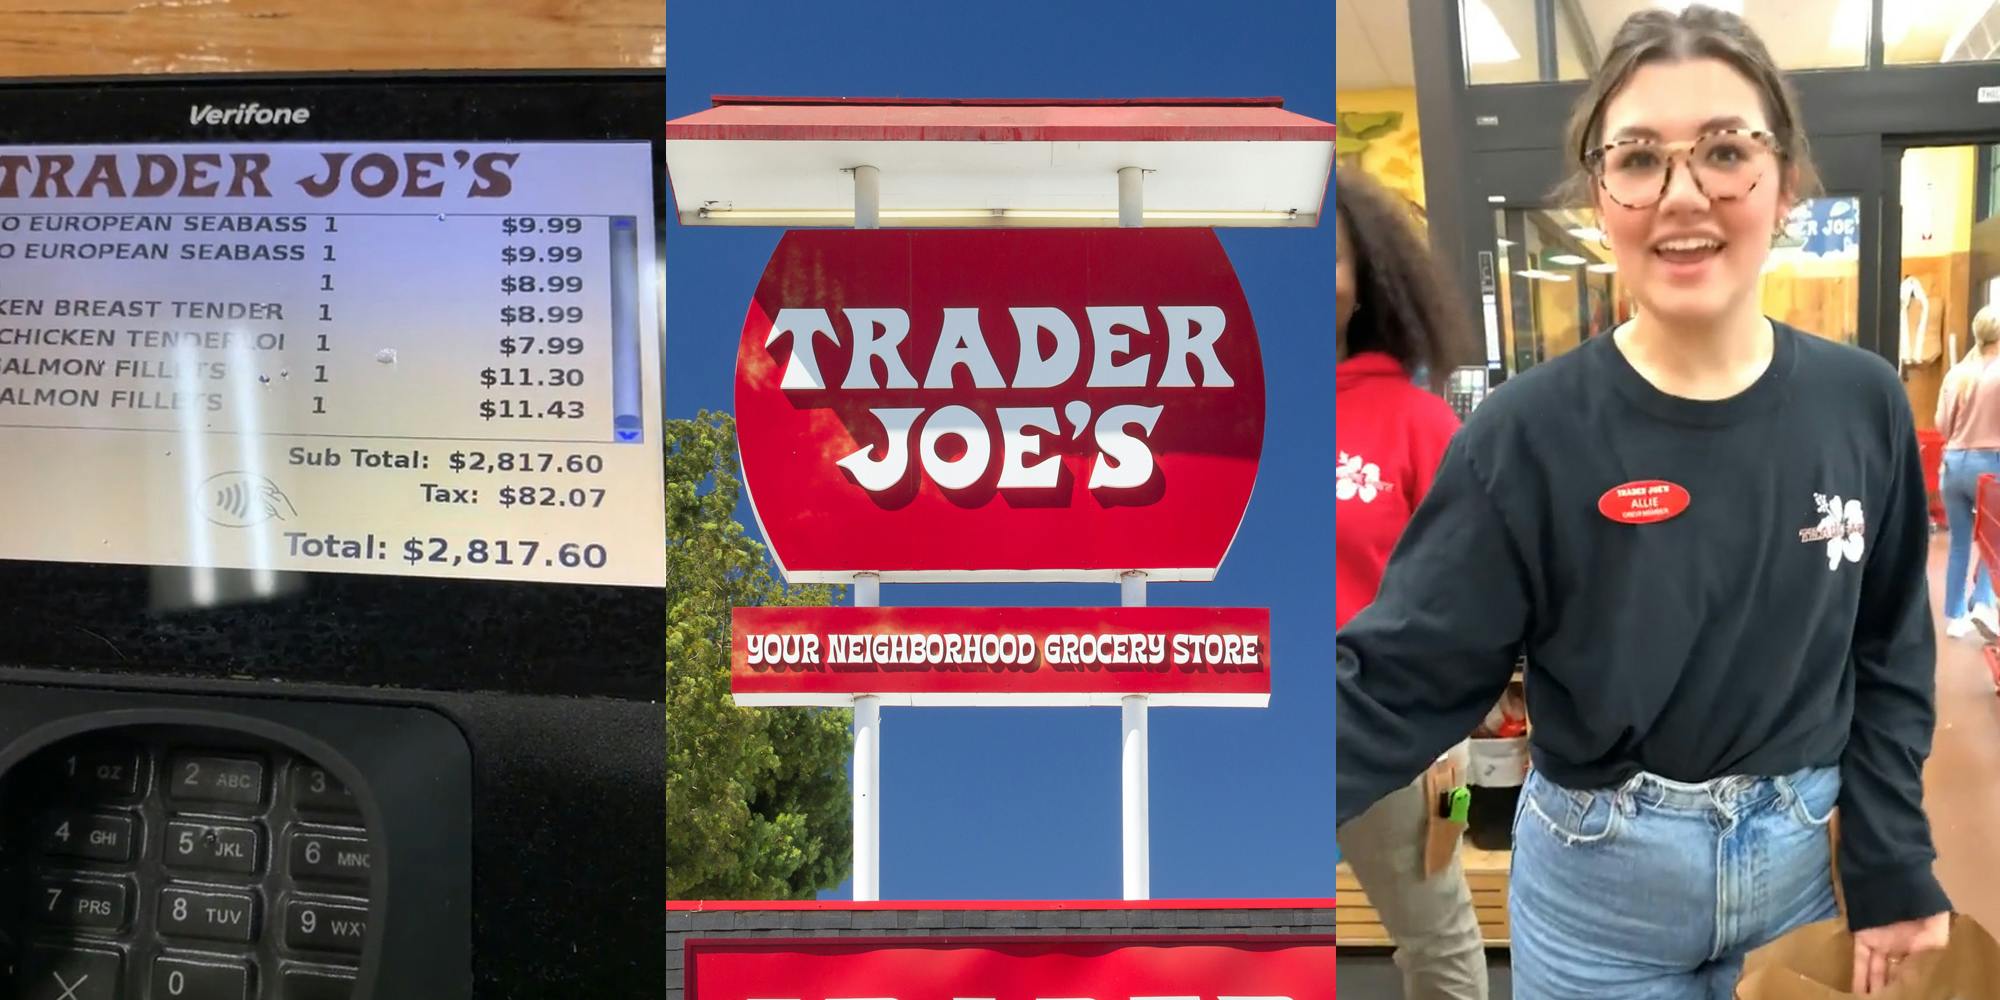 Trader Joes screen displaying $2,817' total (l) Trader Joes sign with blue sky (c) Trader Joe's employee speaking (r)